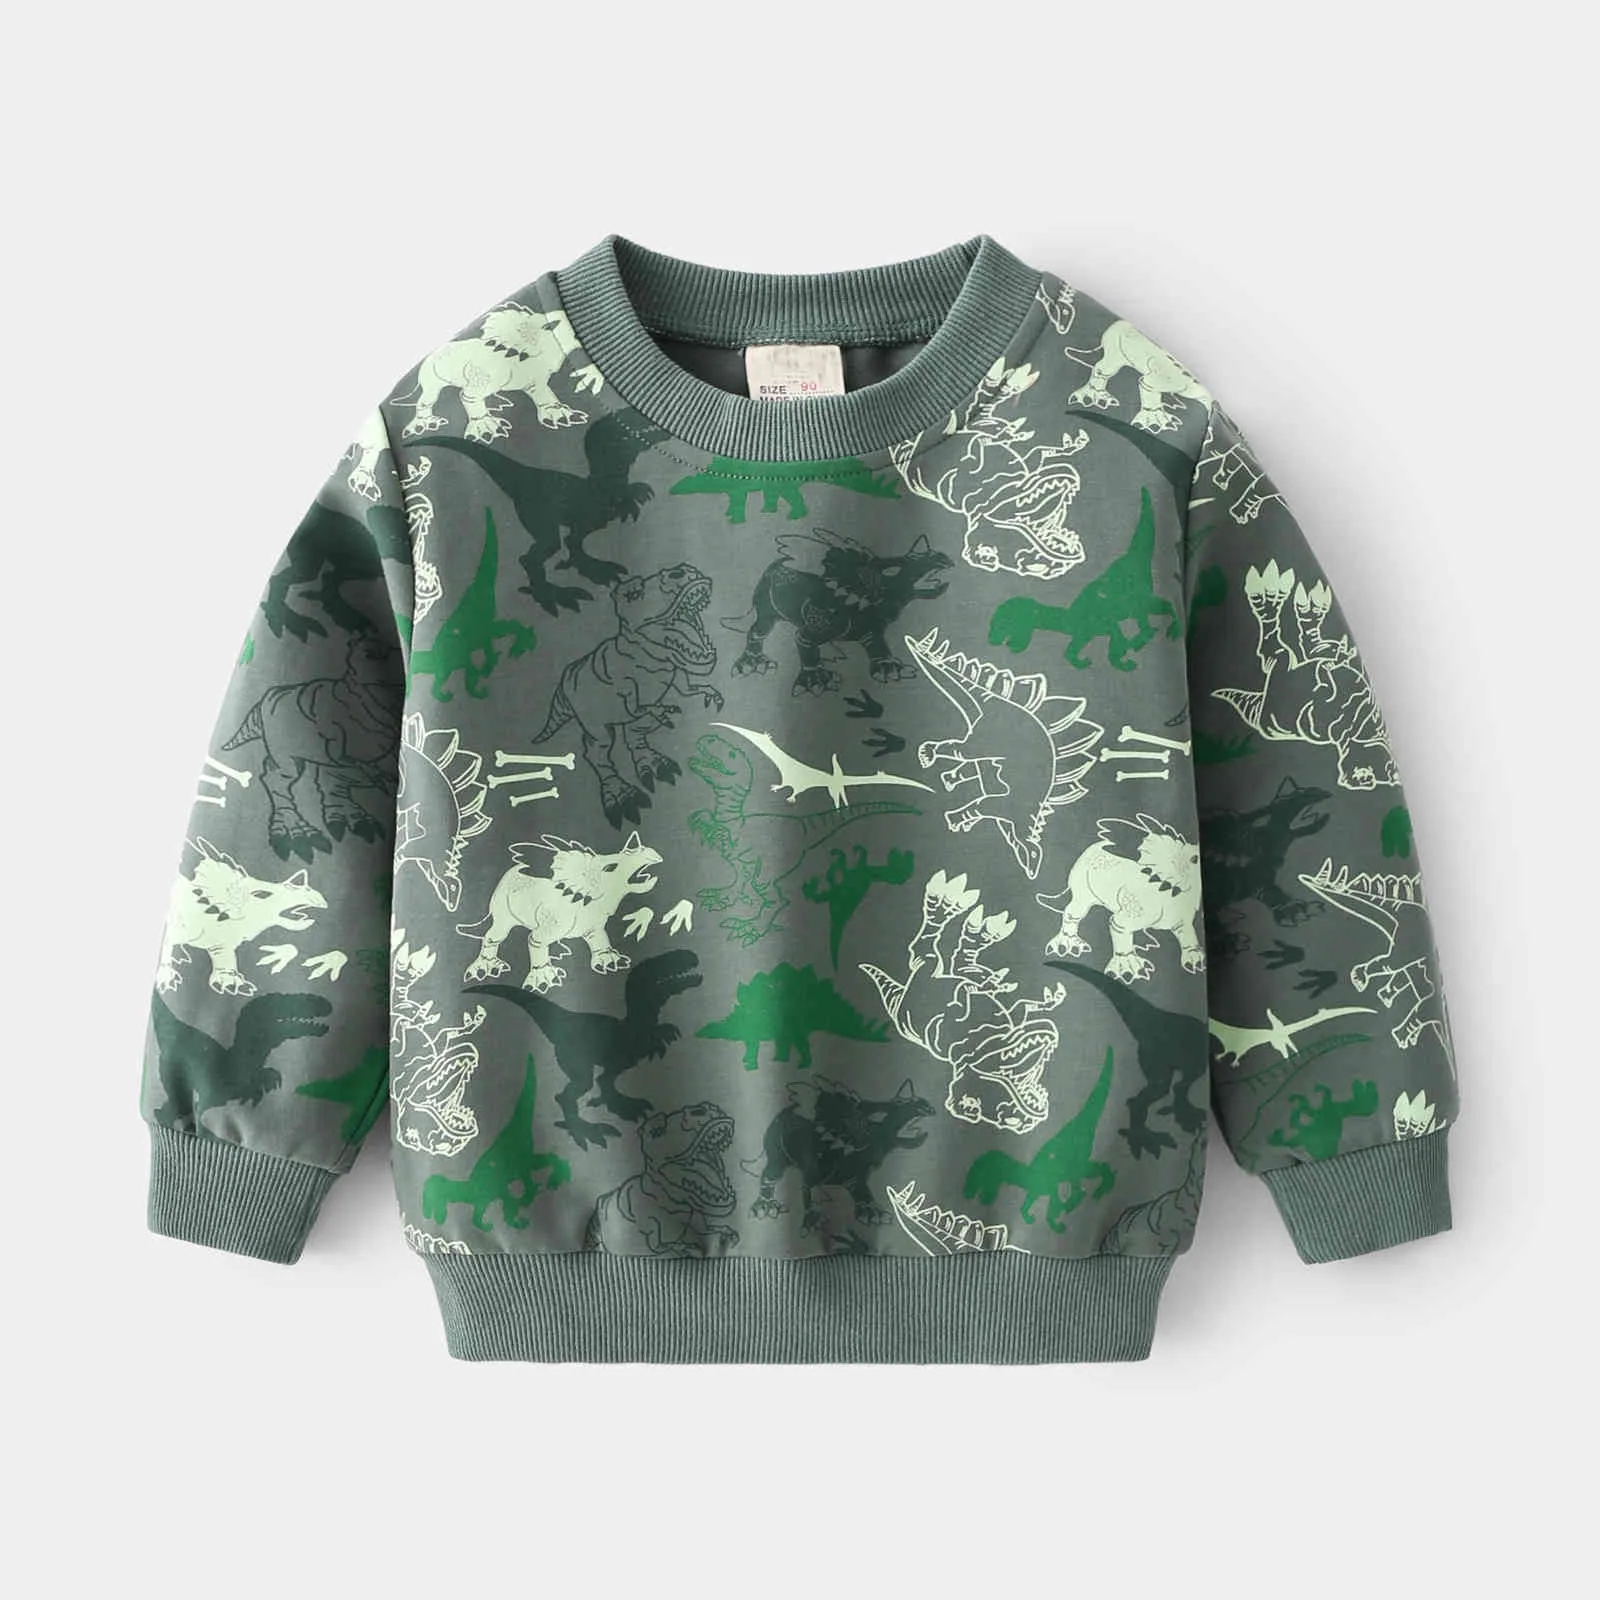 Spring Children's Sweatshirt Boys Cute Dinosaur Print Clothes Kids Long-sleeved Pullover Sweater 2-6 Years Old 210515